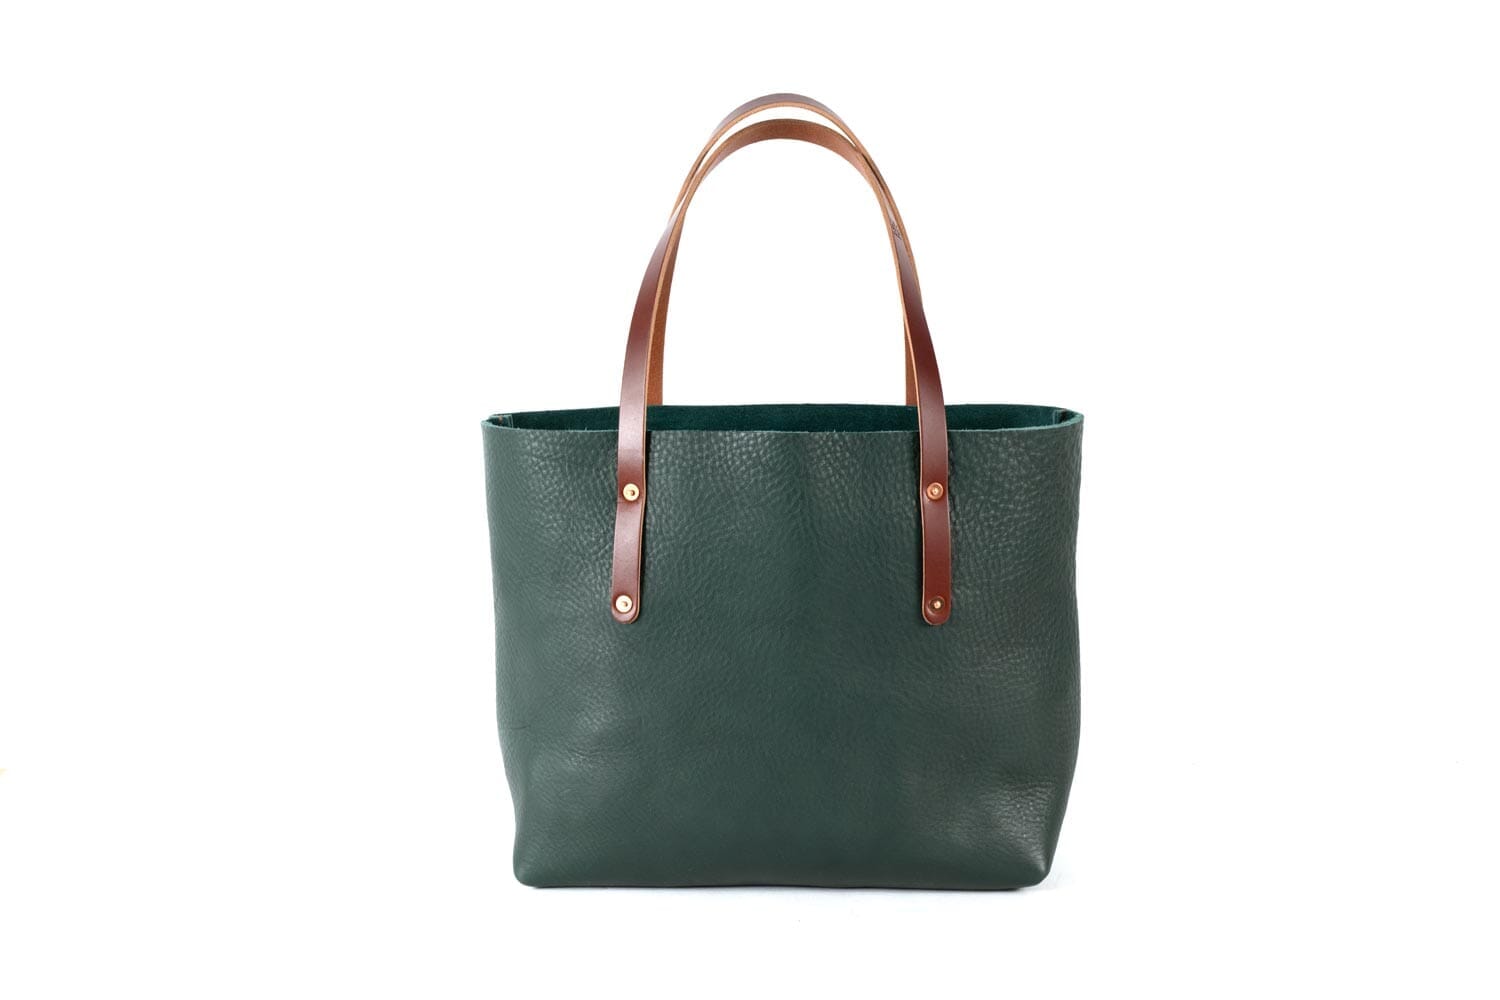 AVERY LEATHER TOTE BAG - LARGE - FOREST GREEN (RTS)